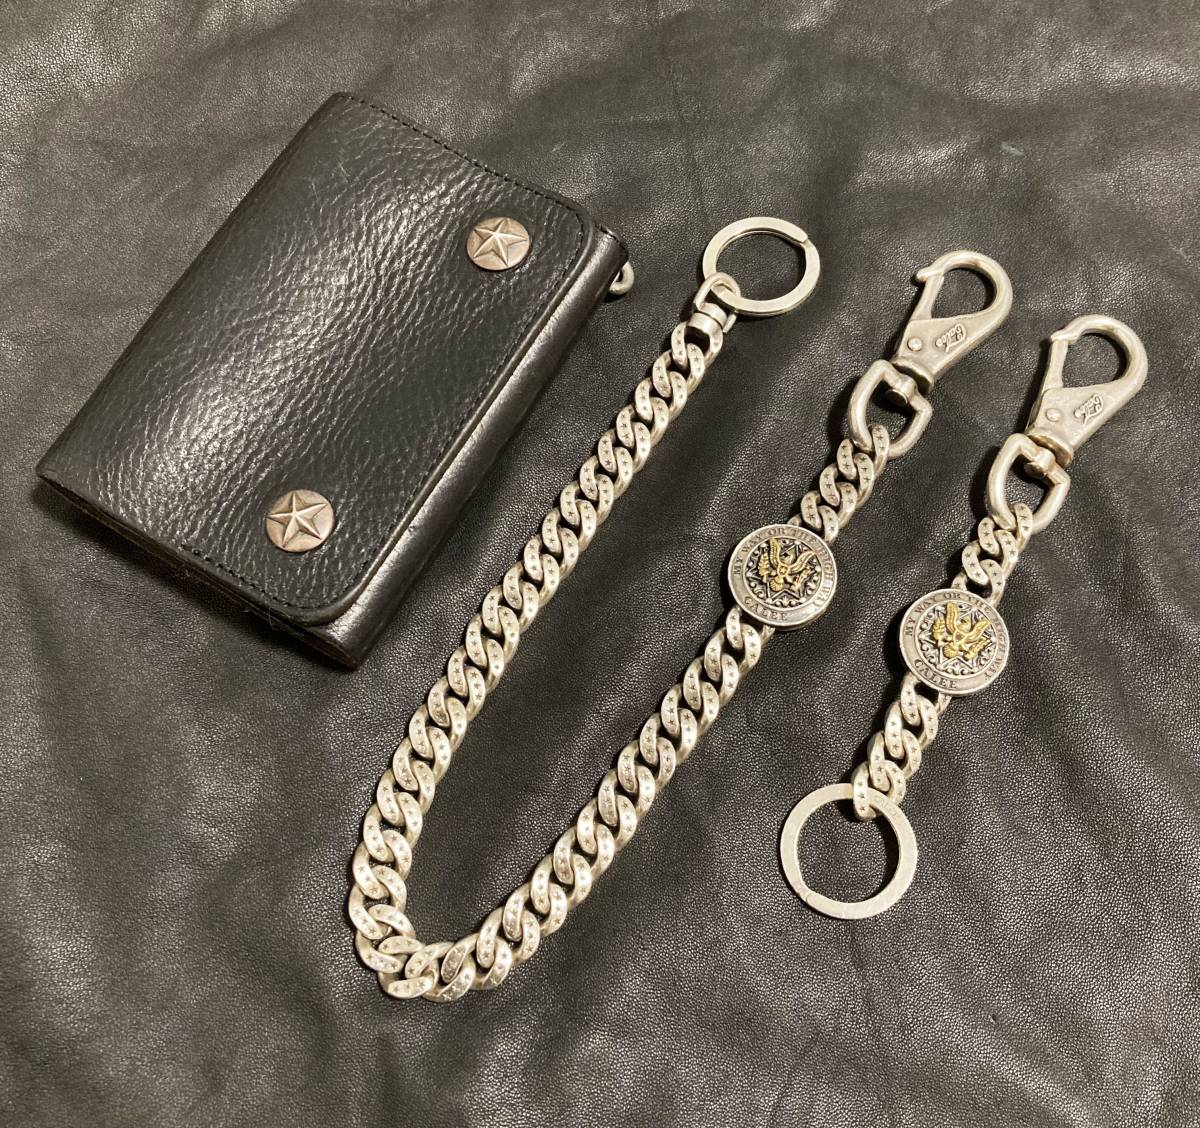 CALEE] 定価30万 SILVER CONCHO WALLET CHAIN KEY CHAIN HALF WALLET ウォレットチェーン  キーチェーン 財布 キャリー